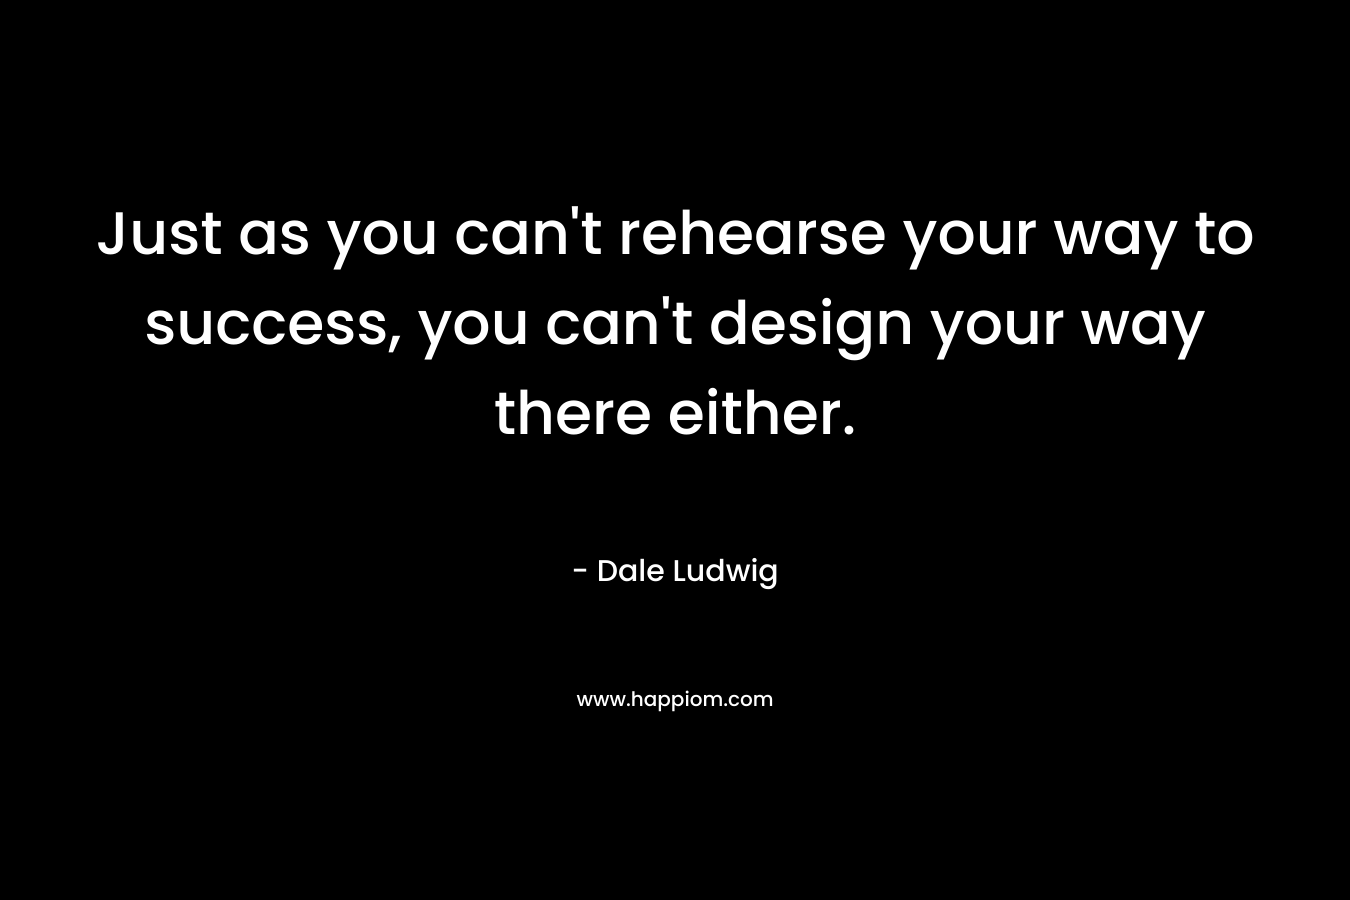 Just as you can’t rehearse your way to success, you can’t design your way there either. – Dale Ludwig